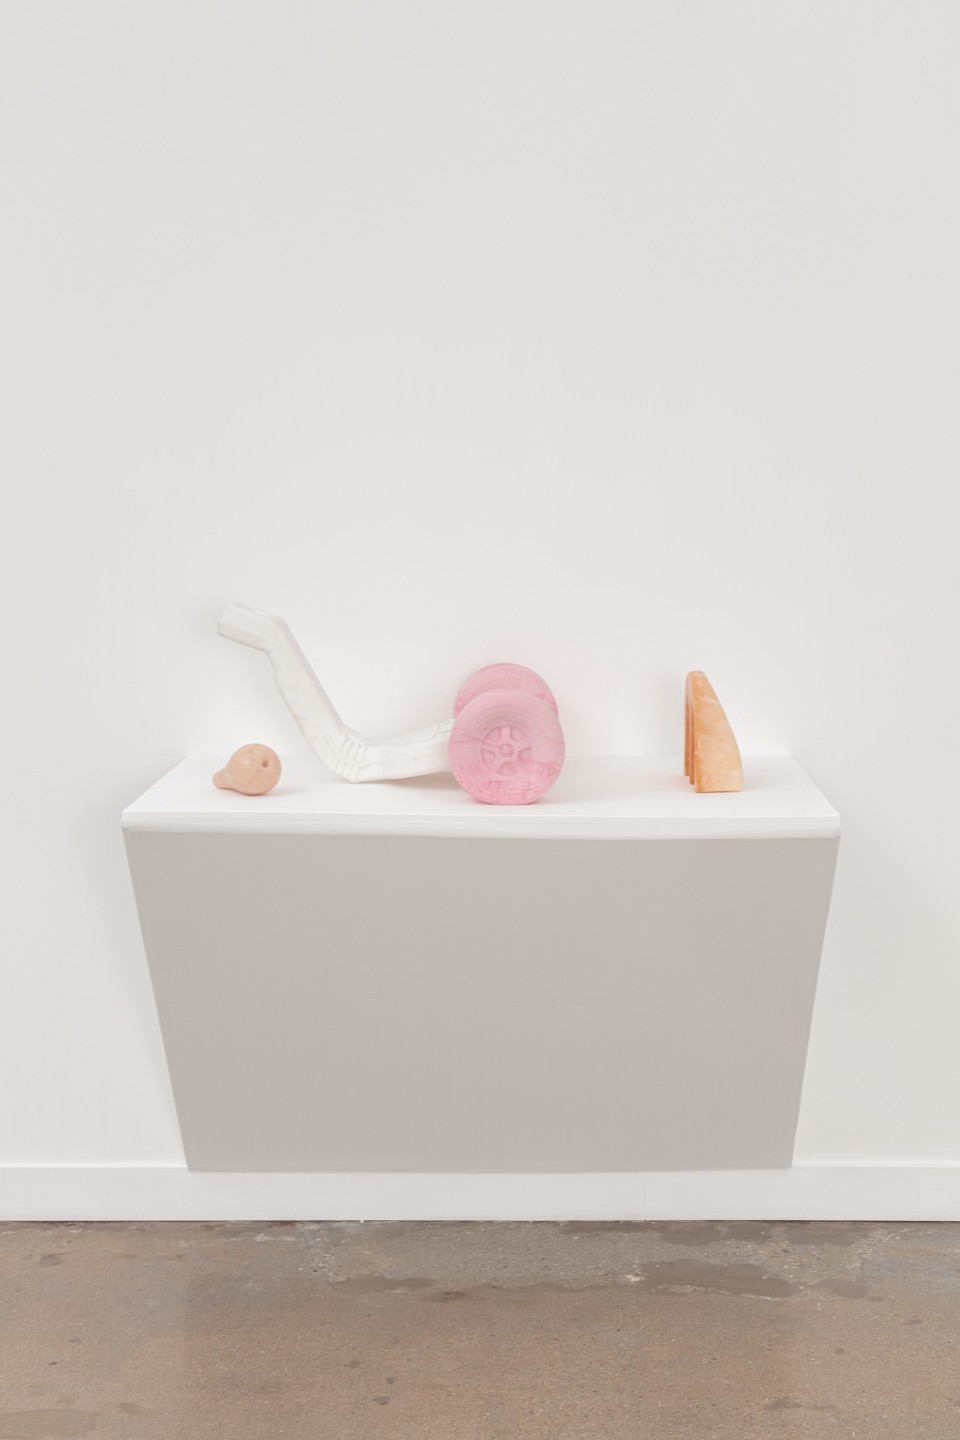 Image: Nevine Mahmoud  Tricycle index (soft parts in 3 components), 2021  plaster, pigment and pink alabaster  13 1/2 x 38 x 22 inches (34.3 x 96.5 x 55.9 cm)